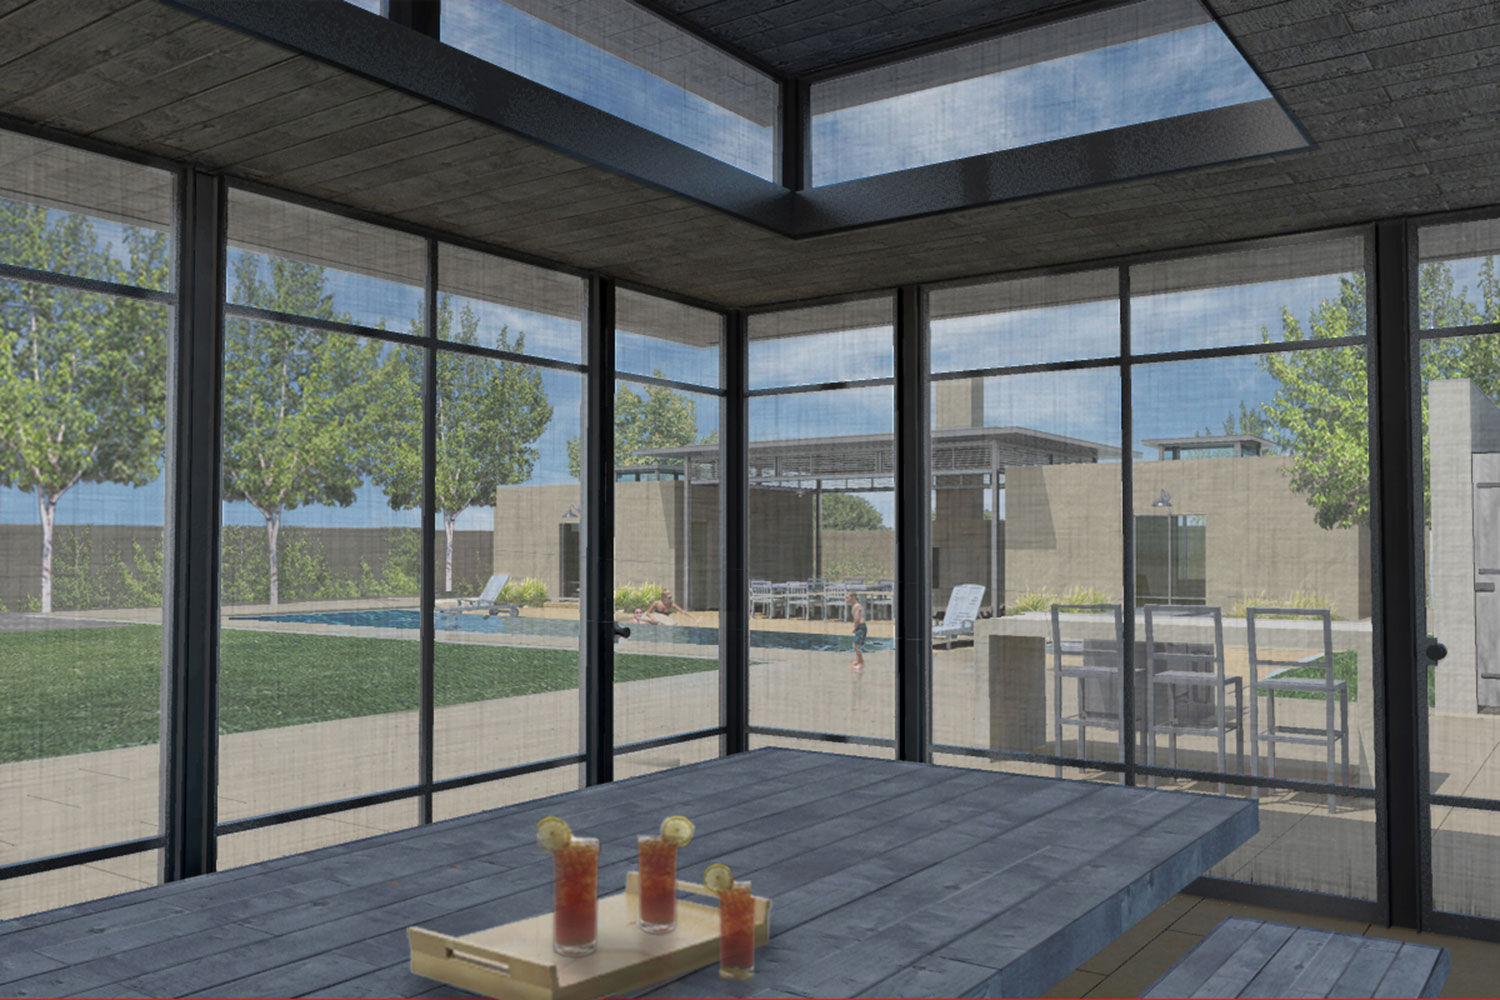  Location: Marfa, Texas   Project Type: New Residence  Project currently in progress 